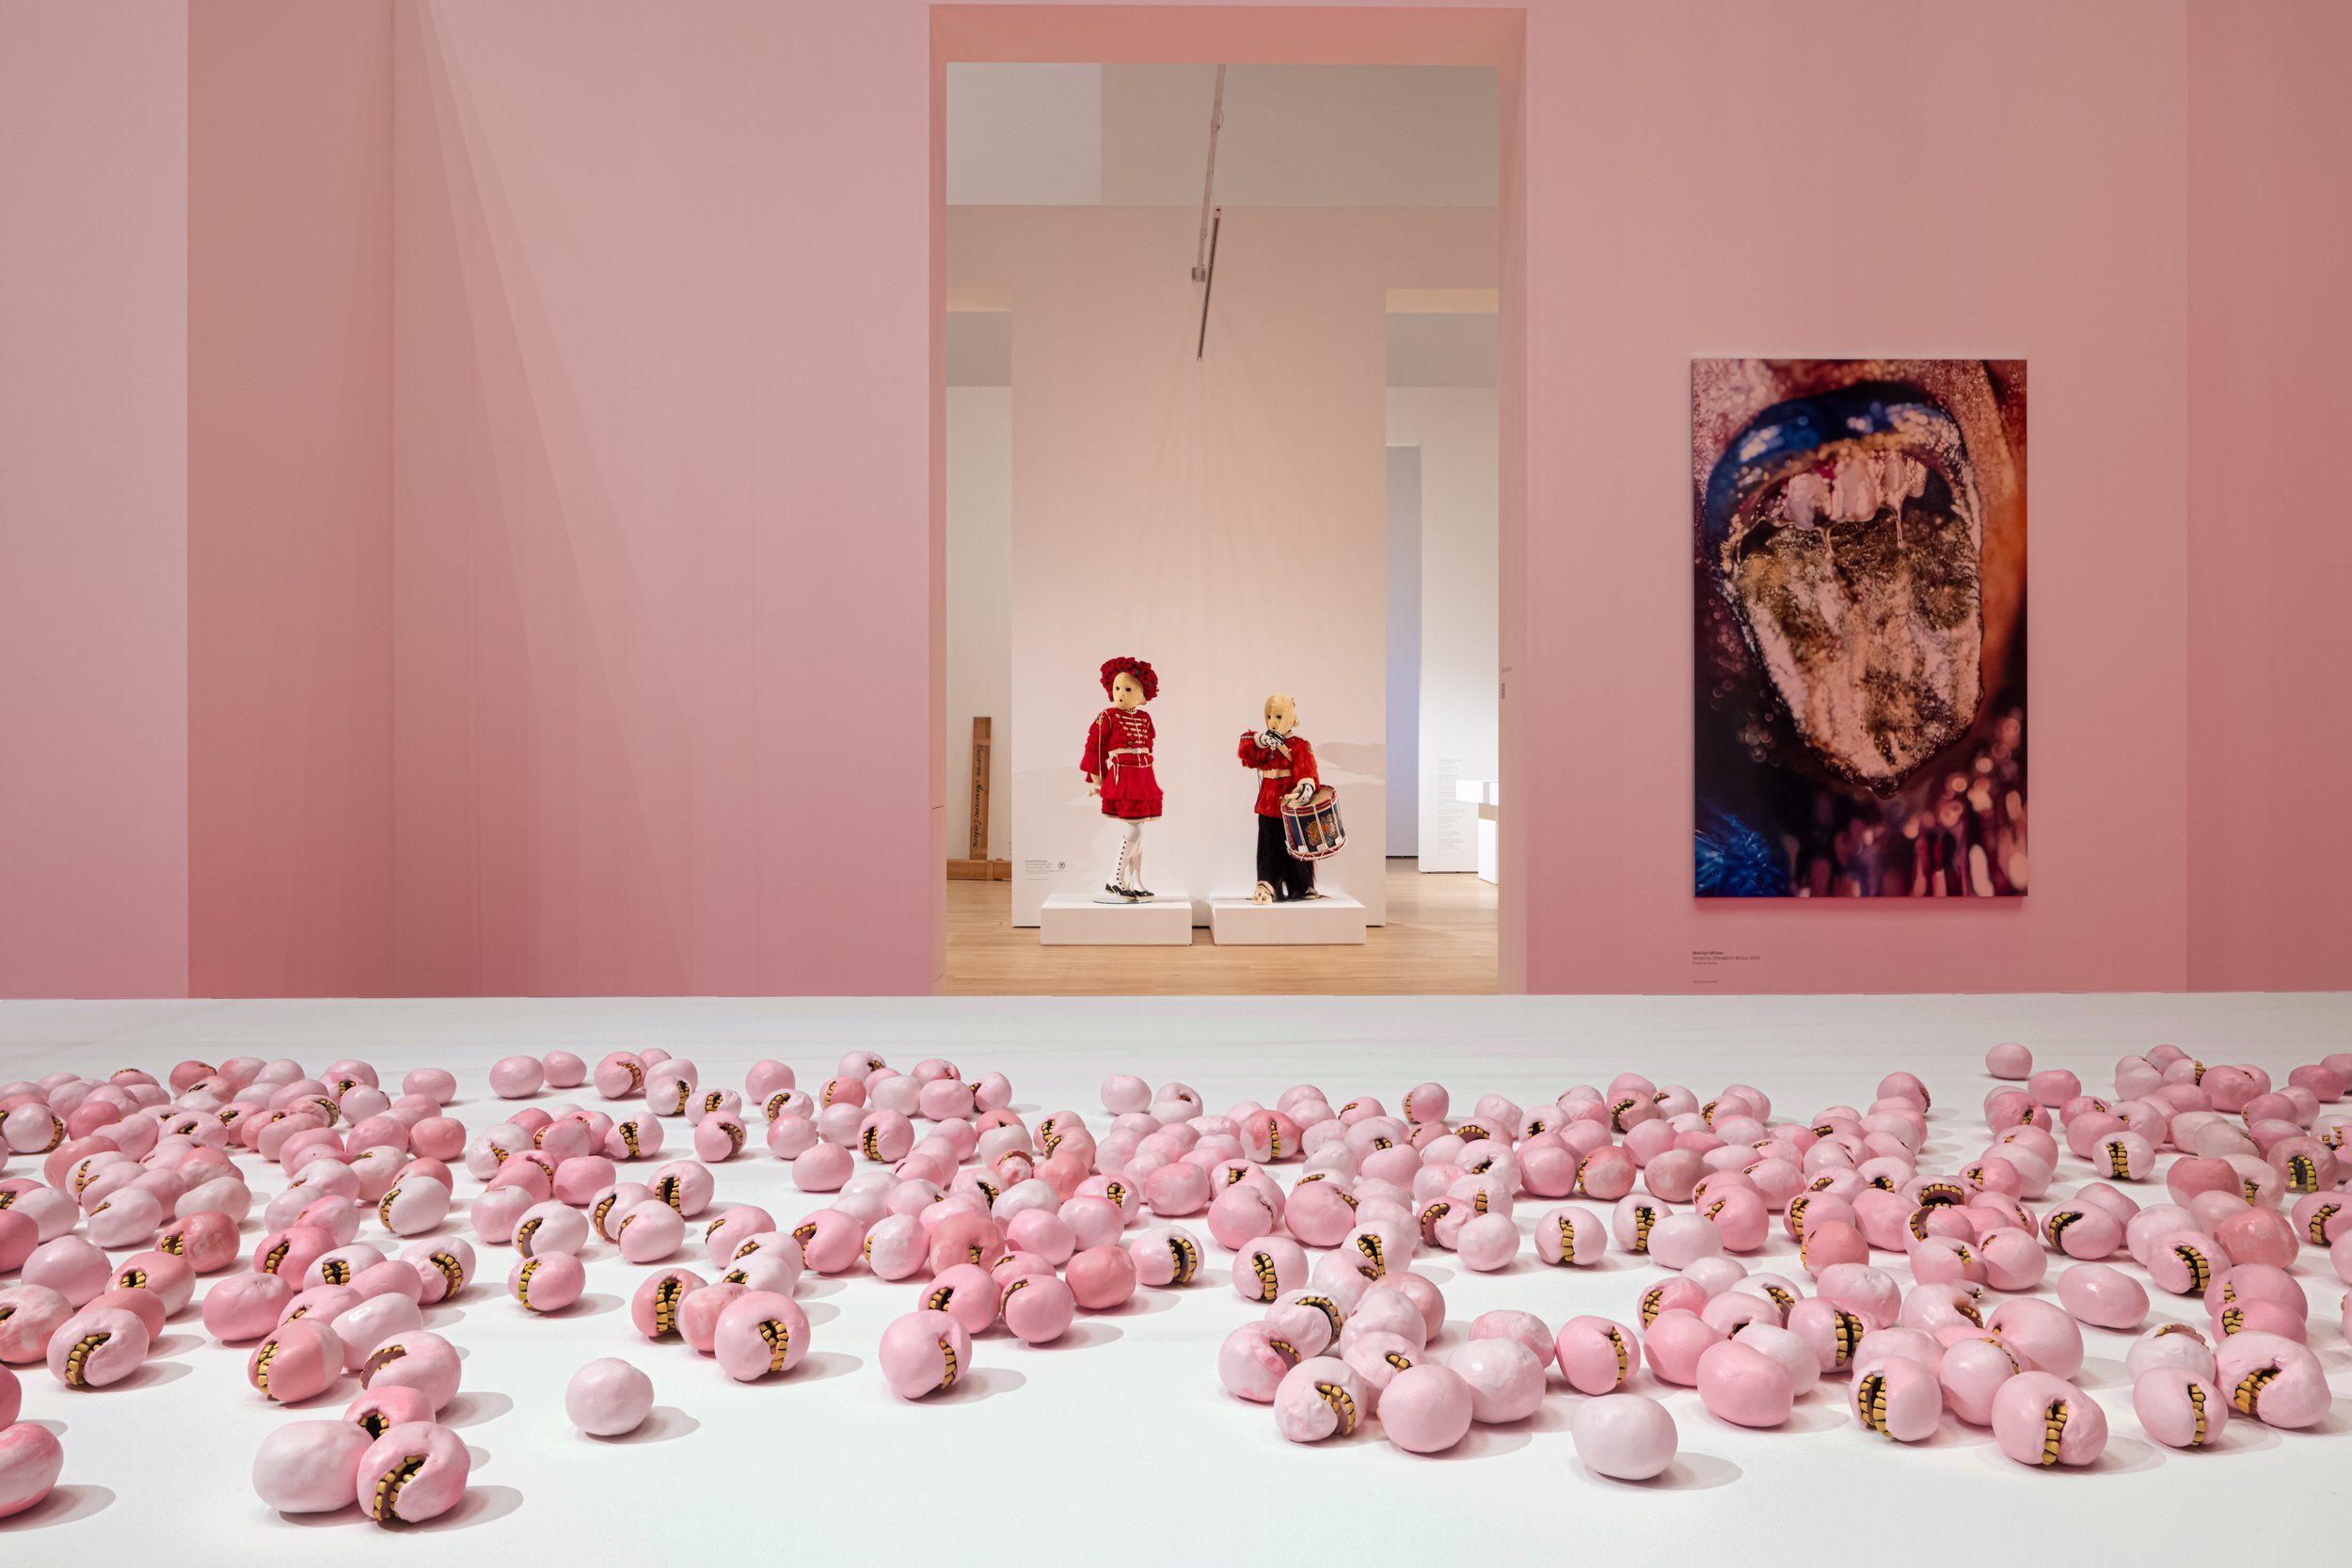  Rona Pondick,  Little Bathers,  1990-91, Pigmented and painted resin, Unique, Overall Dimensions 3 x 63 x 202 in, 500 elements, 2 1/2 x 4 3/4 x 4 in (6.35 x 12.06 x 10.16 cm) 